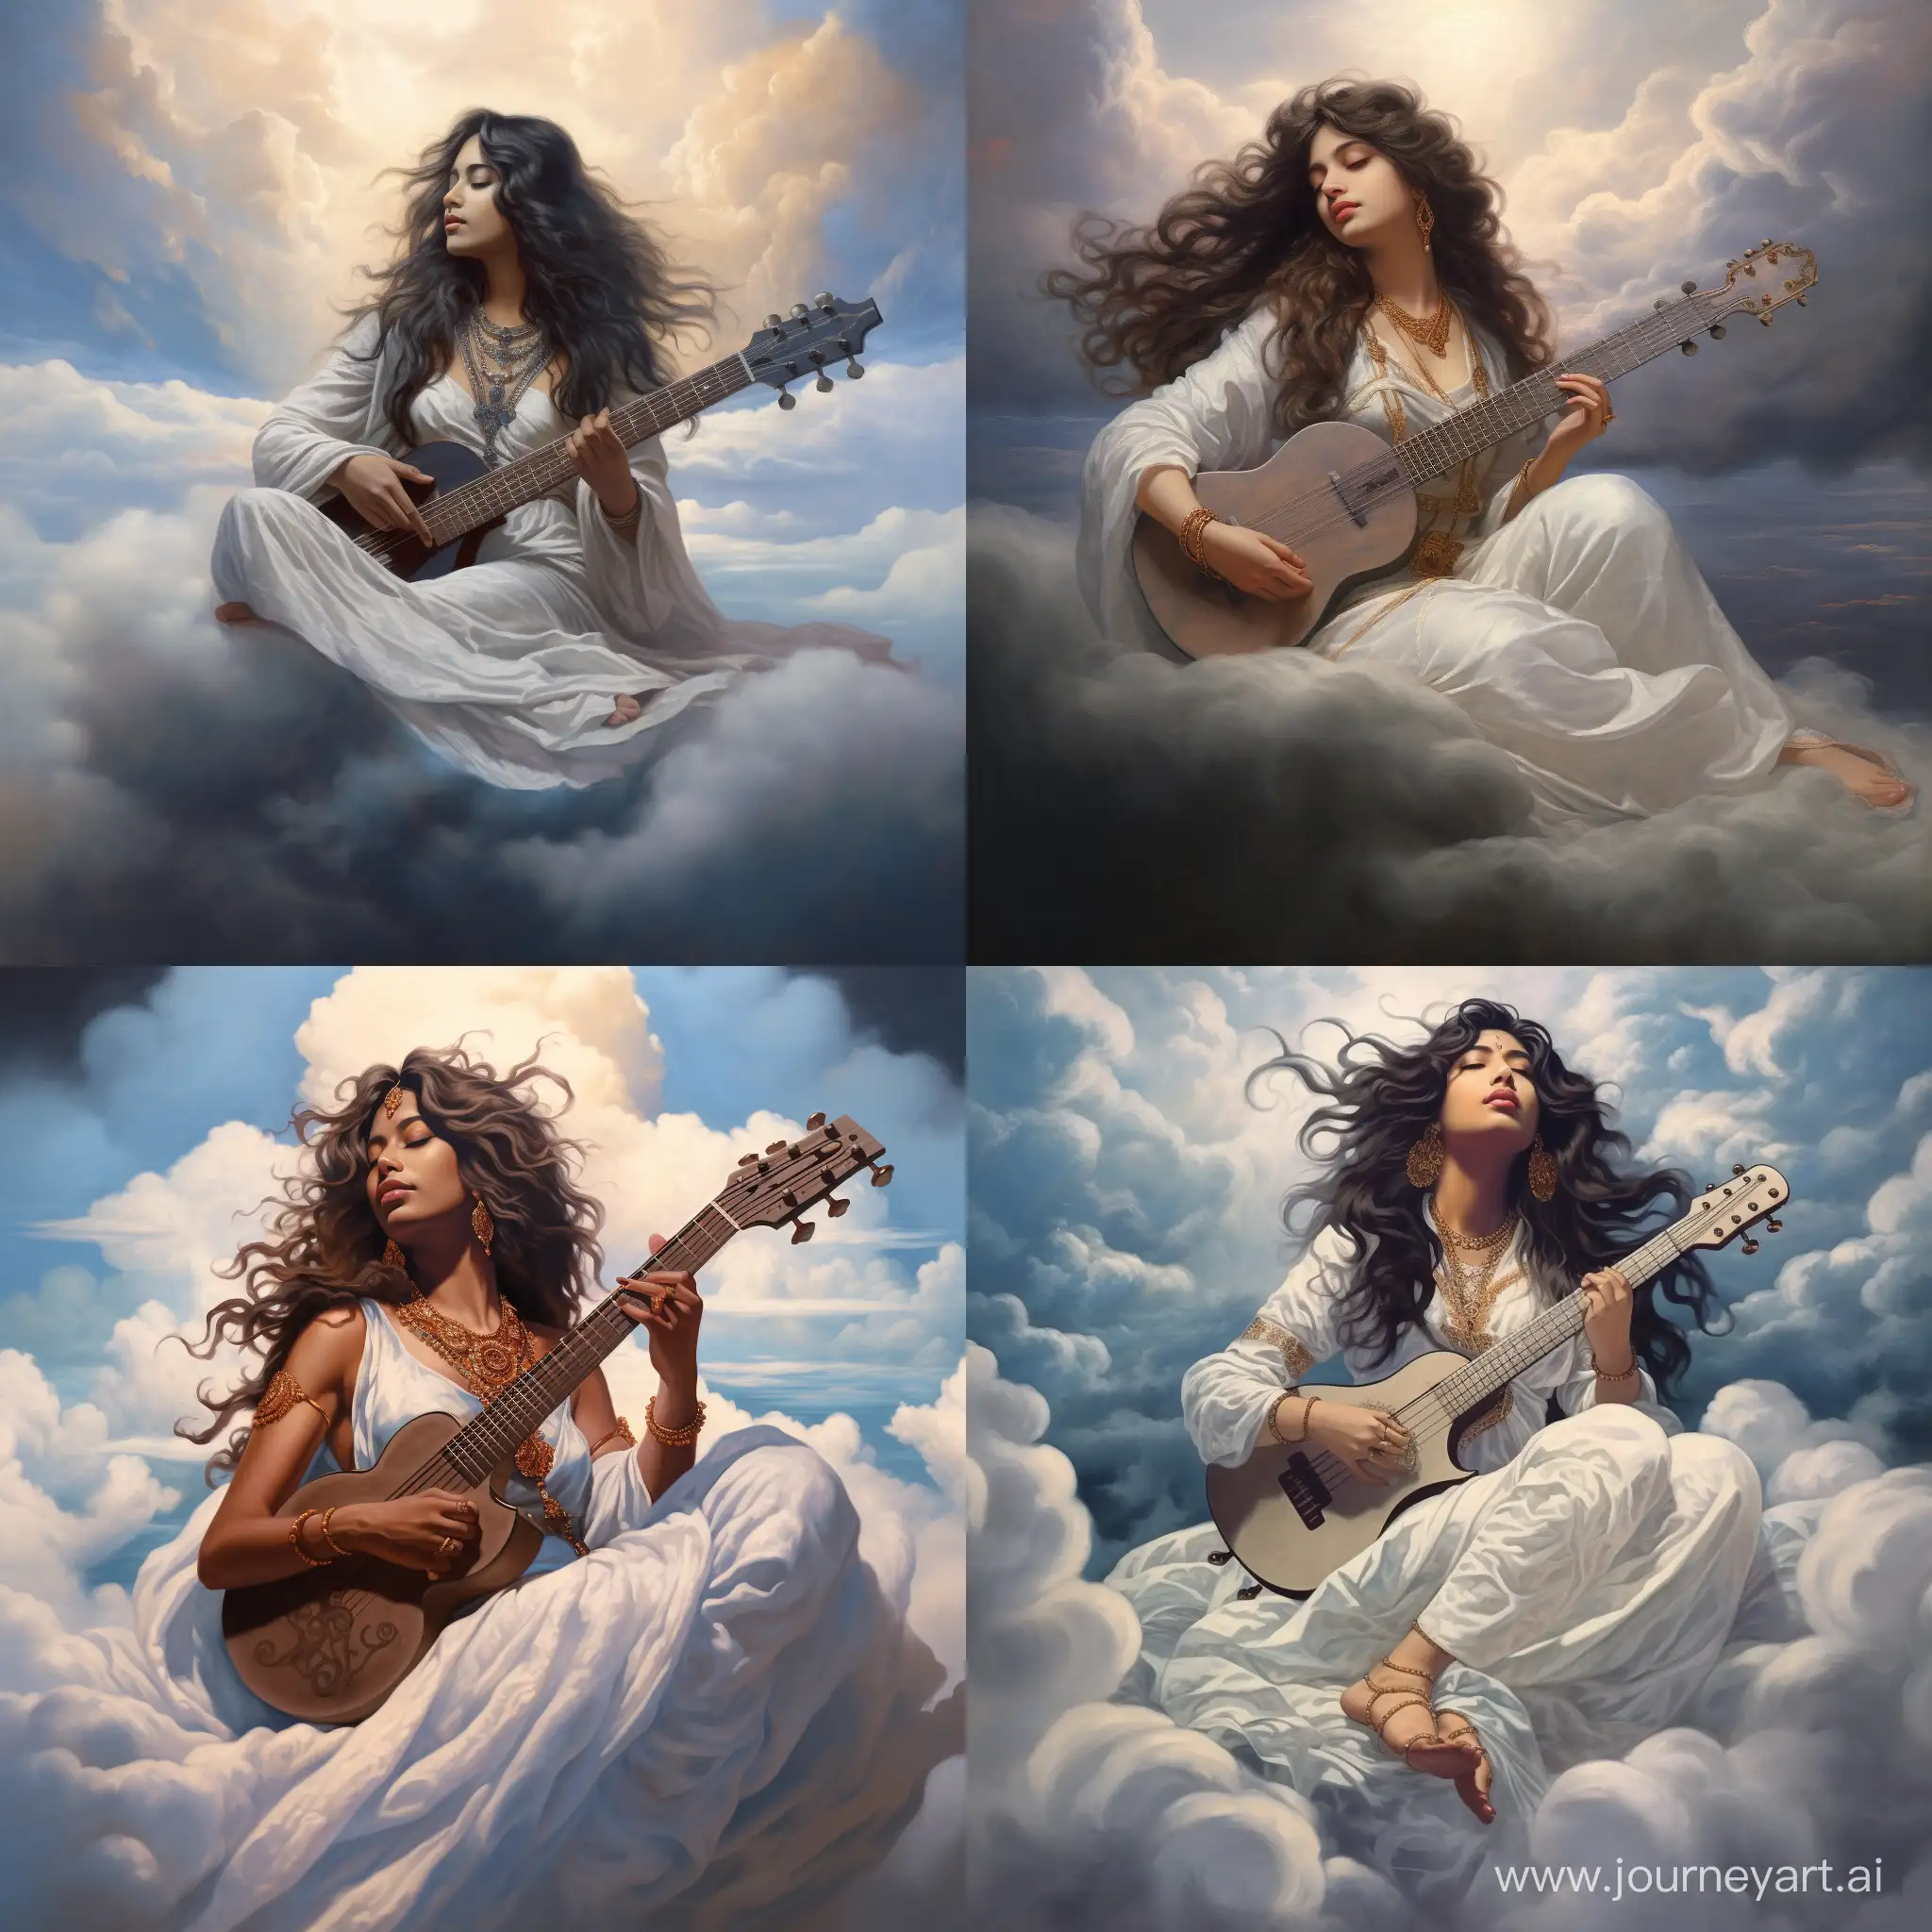 An ethereal woman with long hair made of clouds reading a sitar on a cloud. Highly detailed.